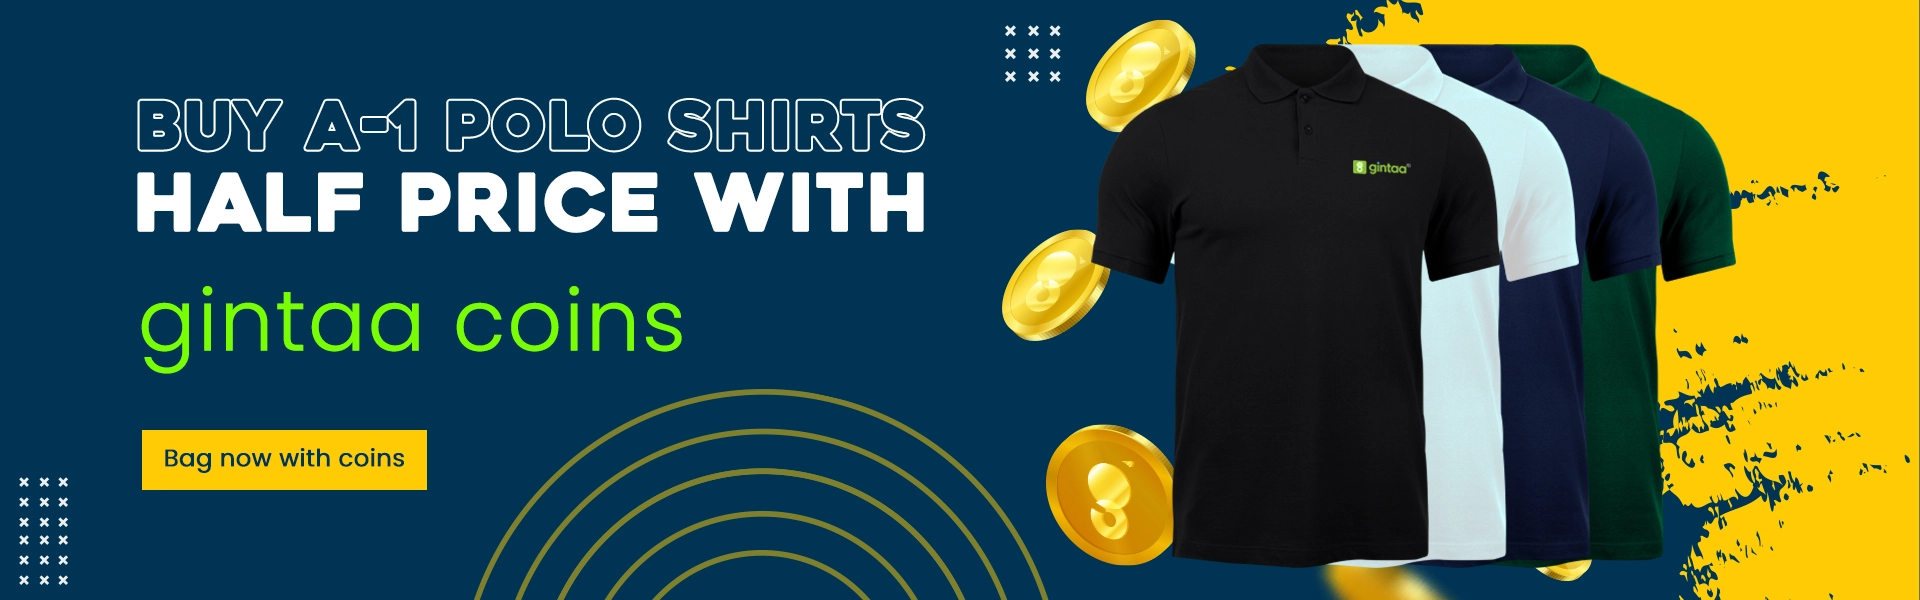 Buy t-shirt at gintaa with gintaa coins